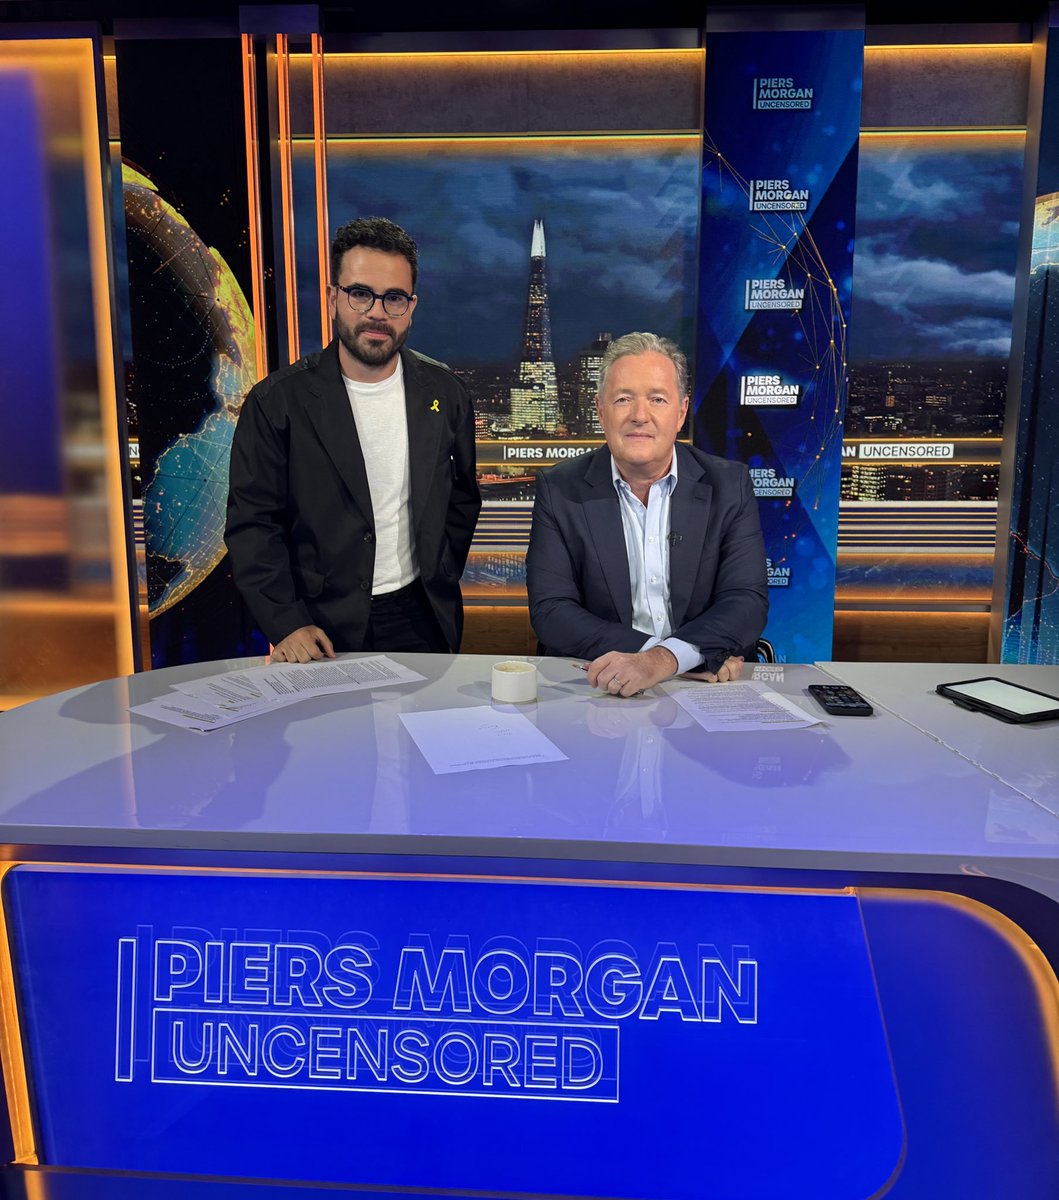 Joined @piersmorgan today to discuss the Eurovision, the Hamas-Israel war and the disproportionate obsession over Israel, by some uneducated Western “Queers for Palestine” who seem to not give a damn about actual queer Palestinians.